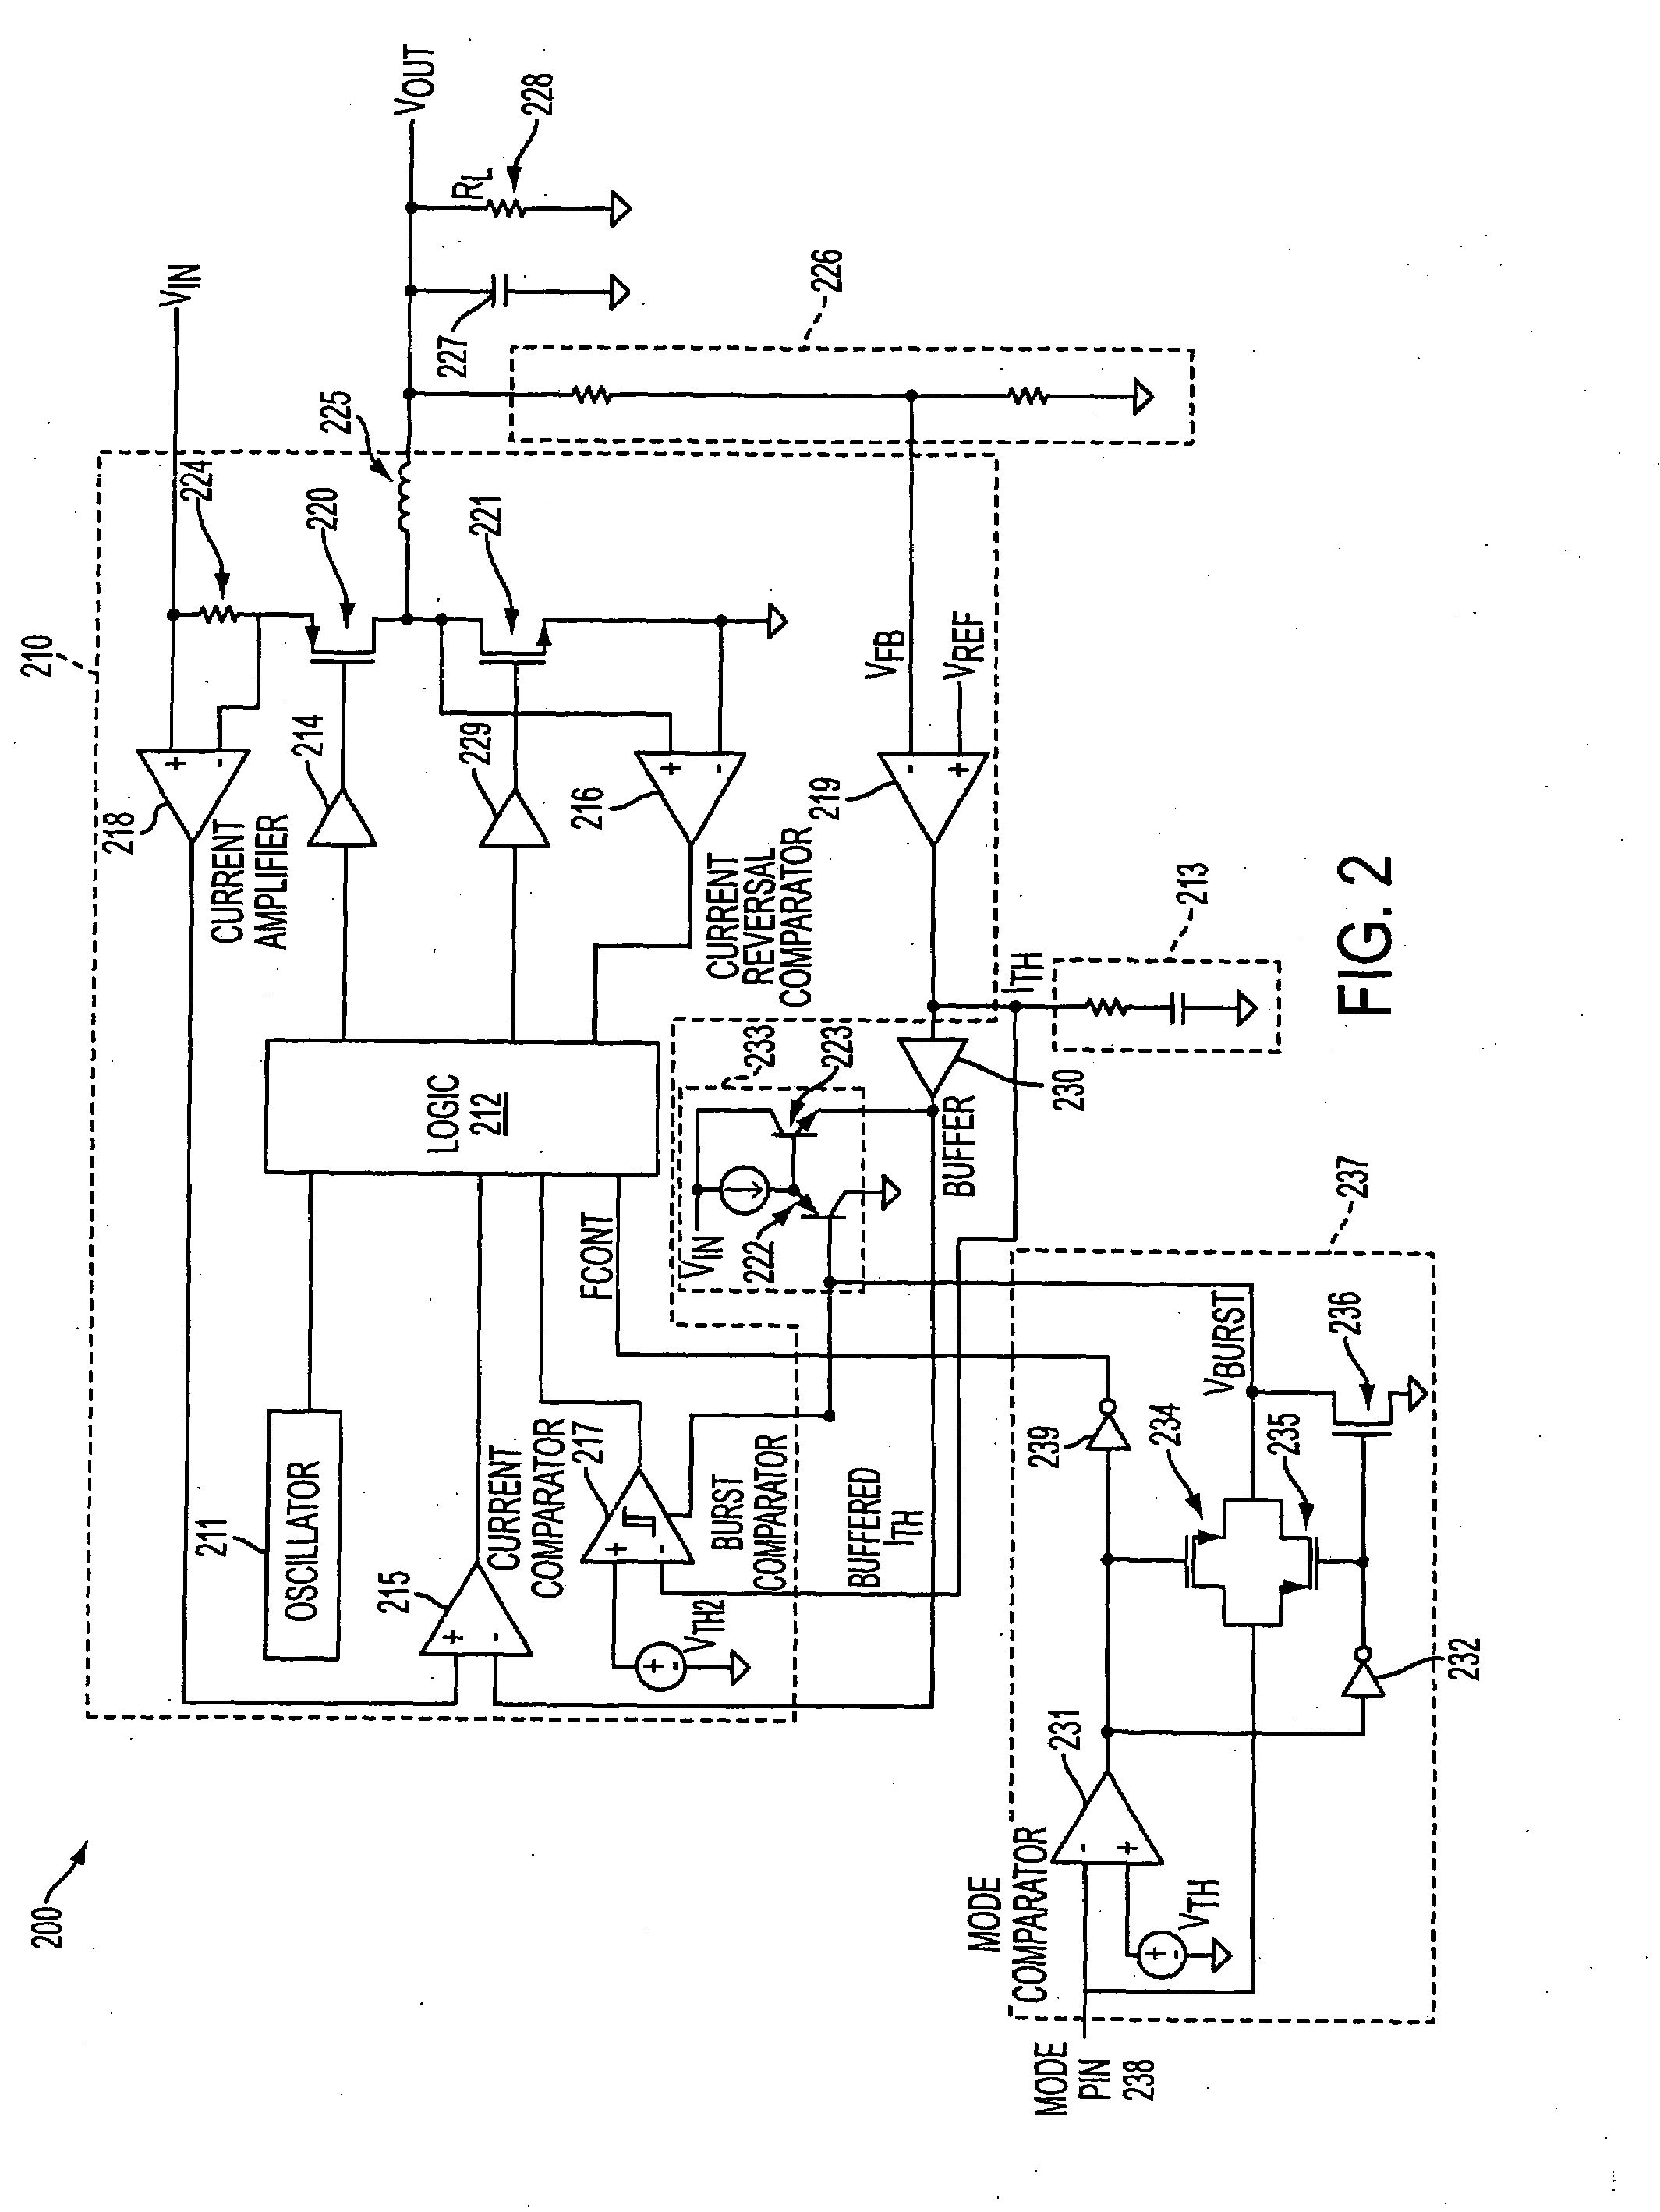 Circuits and methods for adjustable peak inductor current and hysteresis for burst mode in switching regulators